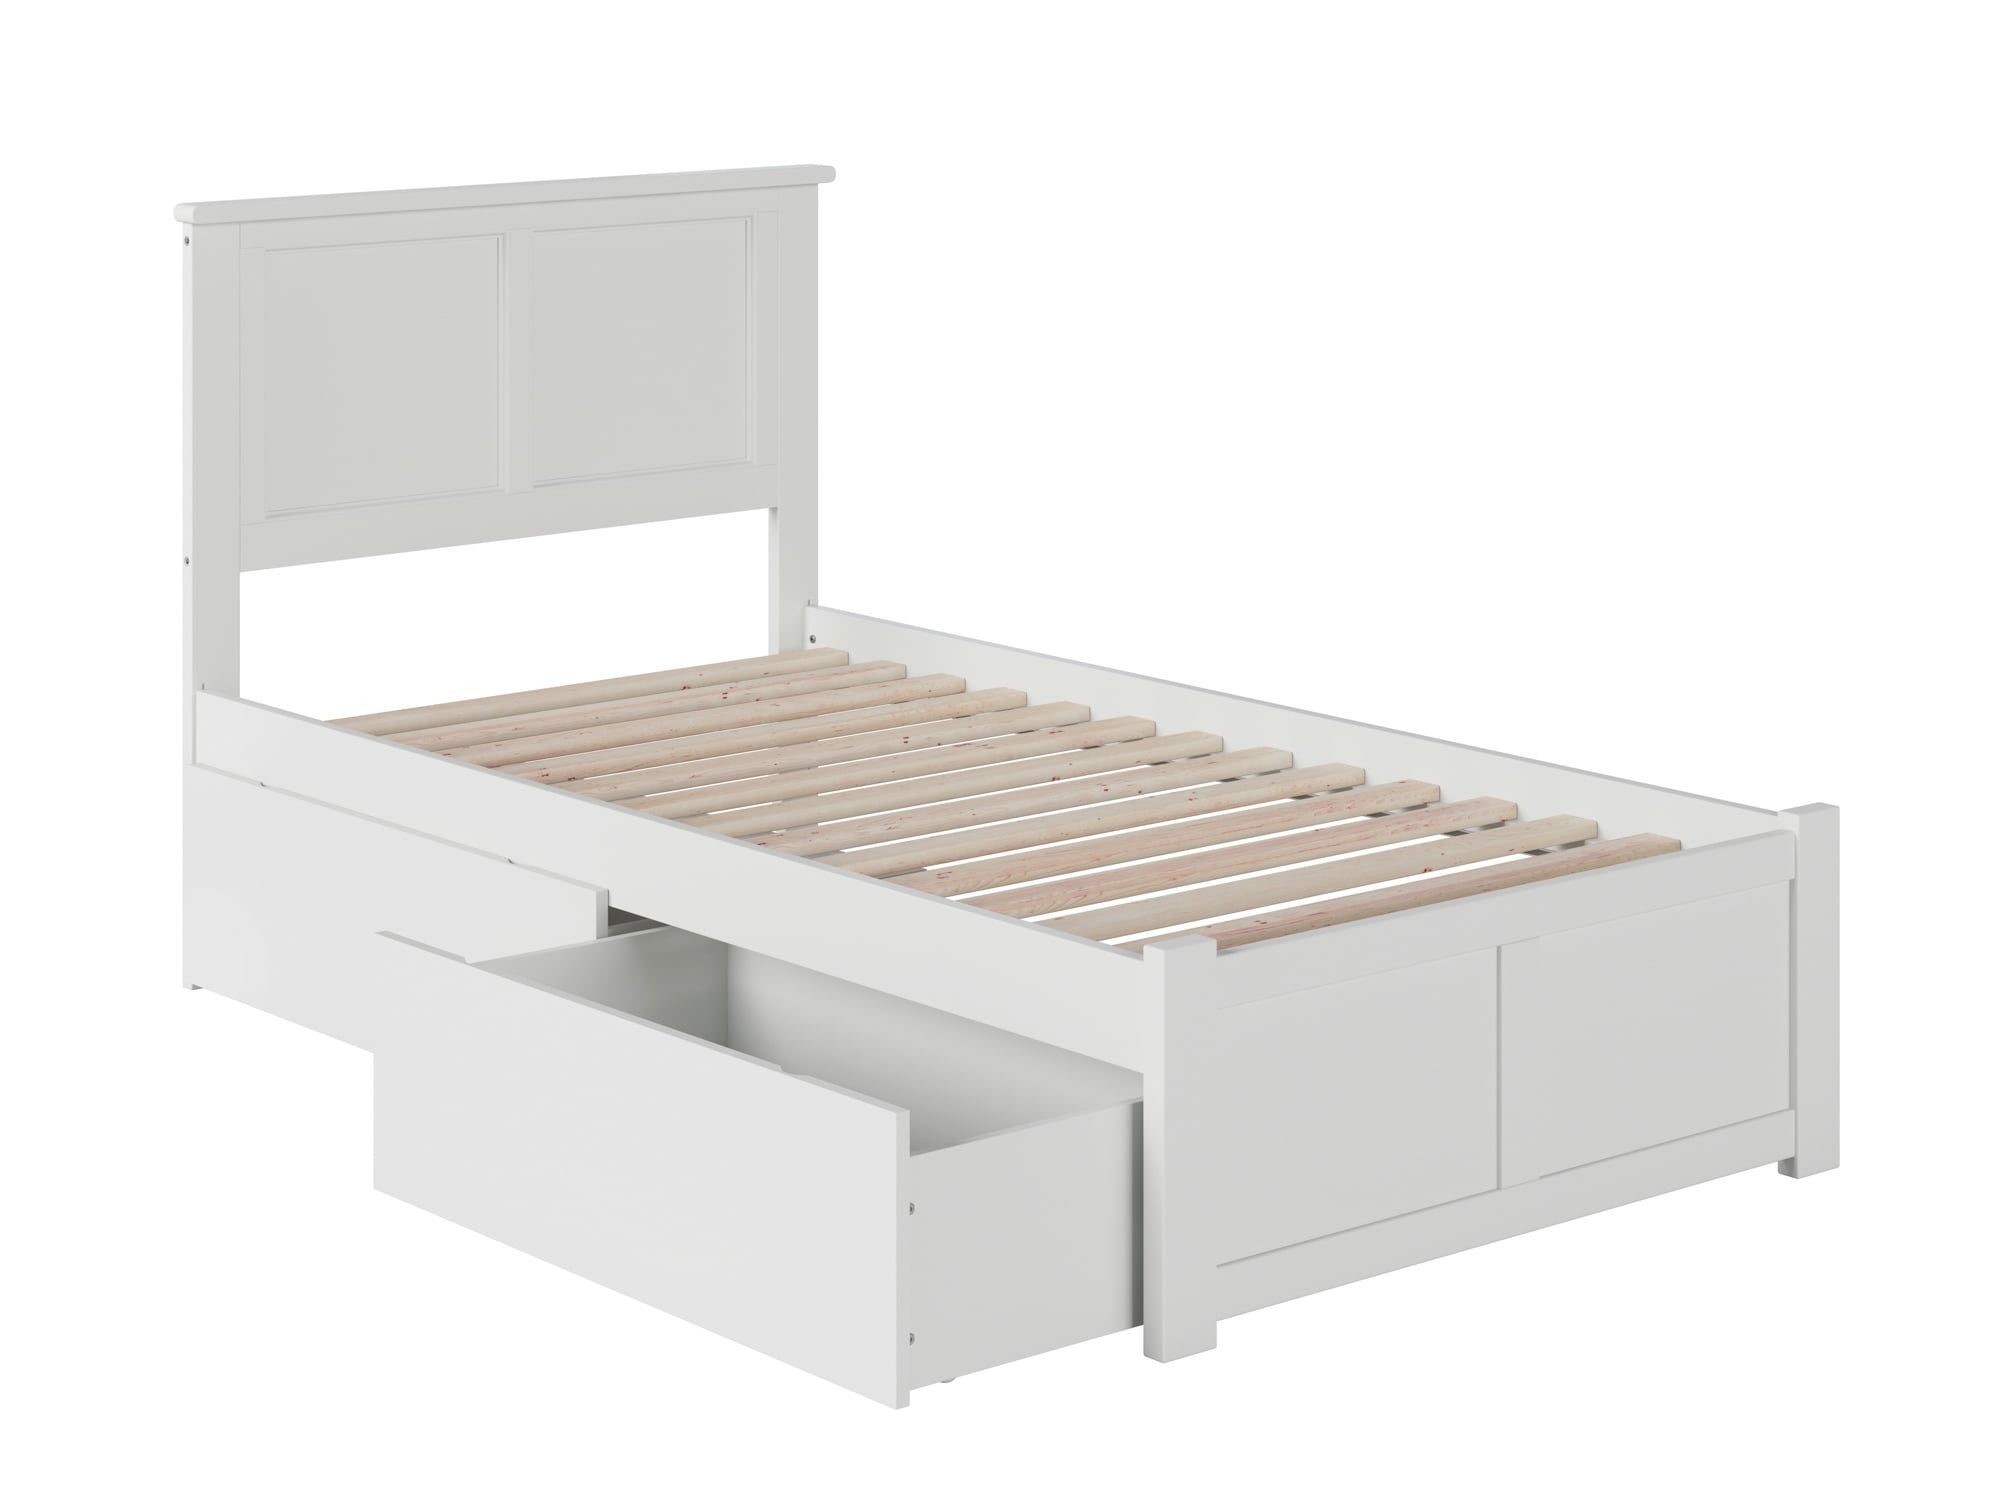 Picture of Atlantic Furniture AR8612112 Madison Flat Panel Foot Board with Urban Bed Drawers, White - Twin Extra Large